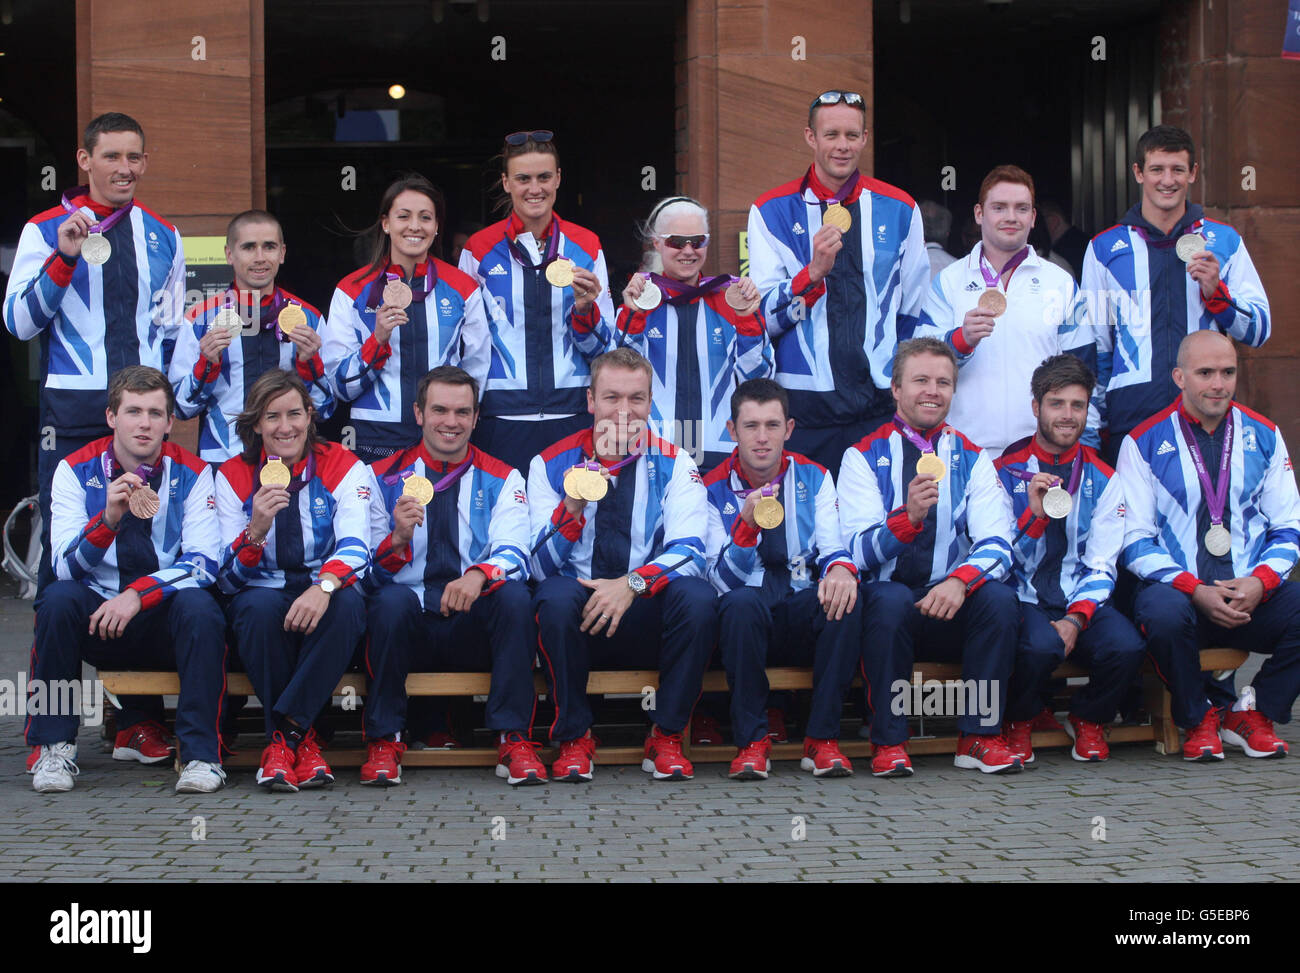 Olympians and Paralympic team members, (back row left to right) David Florence, Neil Fachie, Emily Maguire, Heather Stanning, Aileen McGlynn, David Smith, Daniel Purvis and Michael Jamieson (front row left to right) James Clegg, Katherine Grainger, Tim Baillie, Sir Chris Hoy, Scott Brash, Craig Maclean, Luke Patience and Sam Ingram, pose for a group picture prior to the official victory parade for Scotland's Olympic and Paralympic teams in Glasgow. Stock Photo